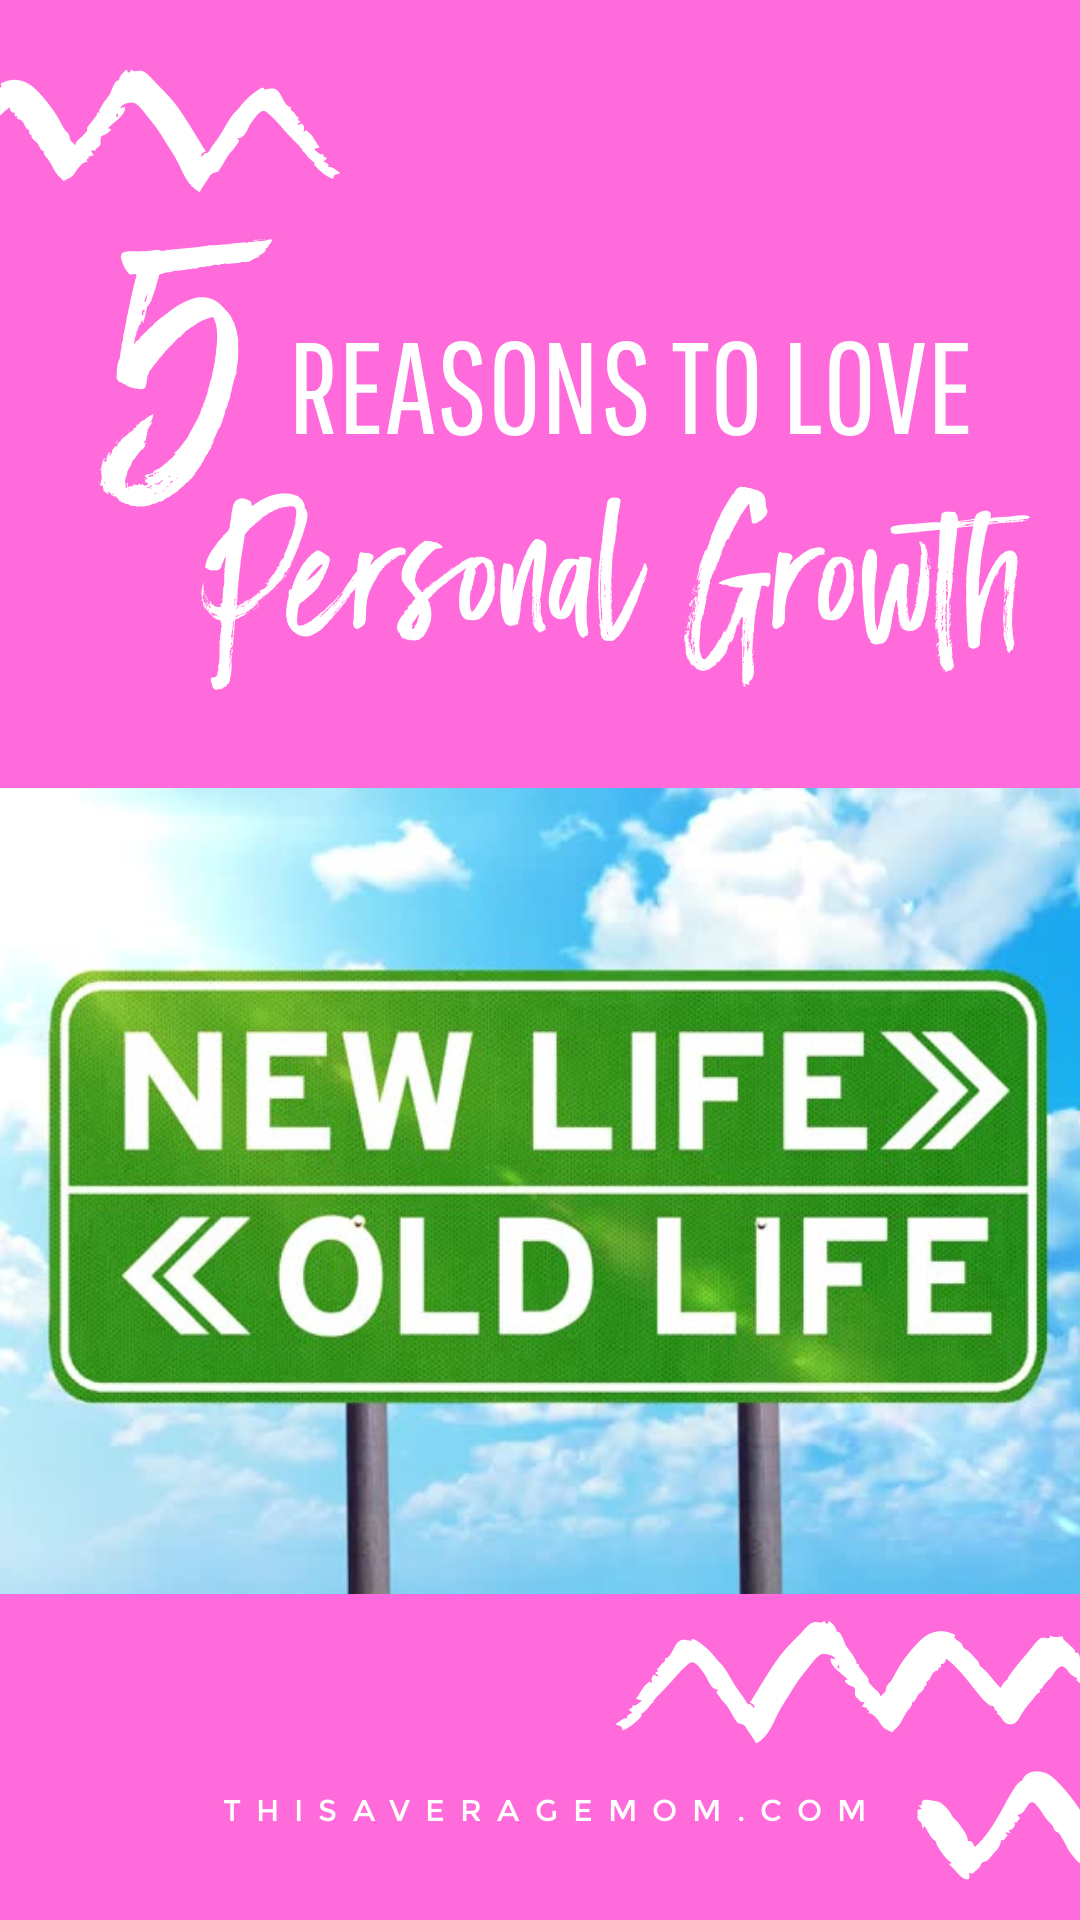 Two years ago, I didn’t know what “personal growth” was. Today, I’m a huge fan of personal growth and am working daily to learn and change. I’m sharing 5 reasons to love personal growth on the blog!